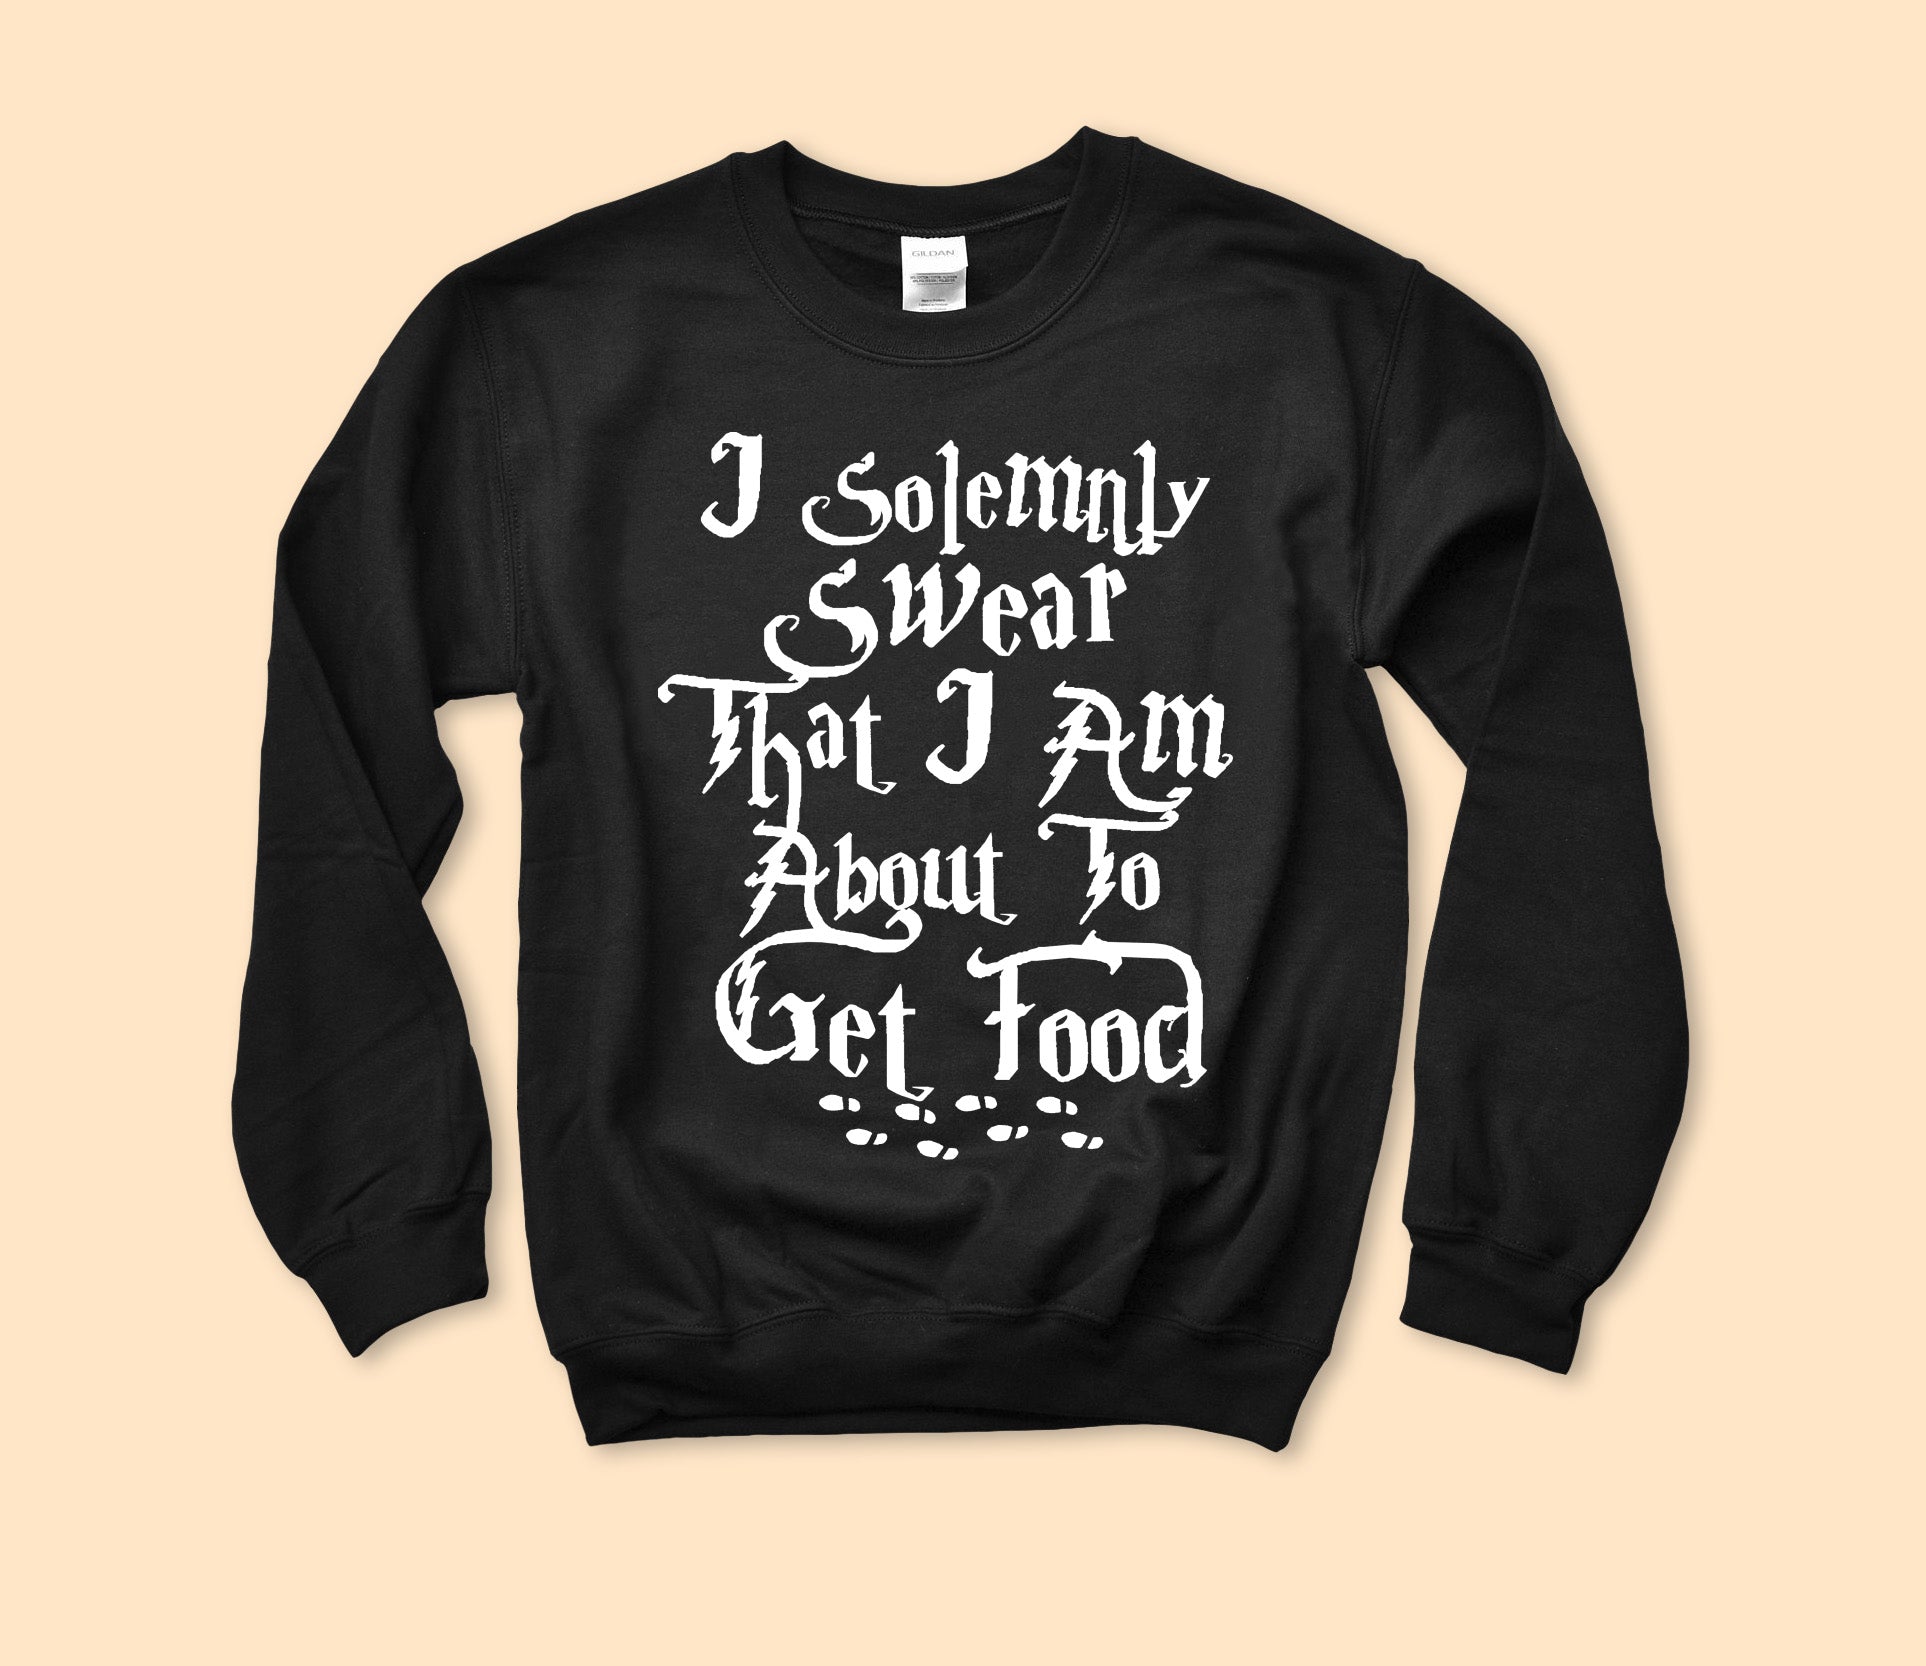 I Solemnly Swear That I Am About To Get Food Sweatshirt